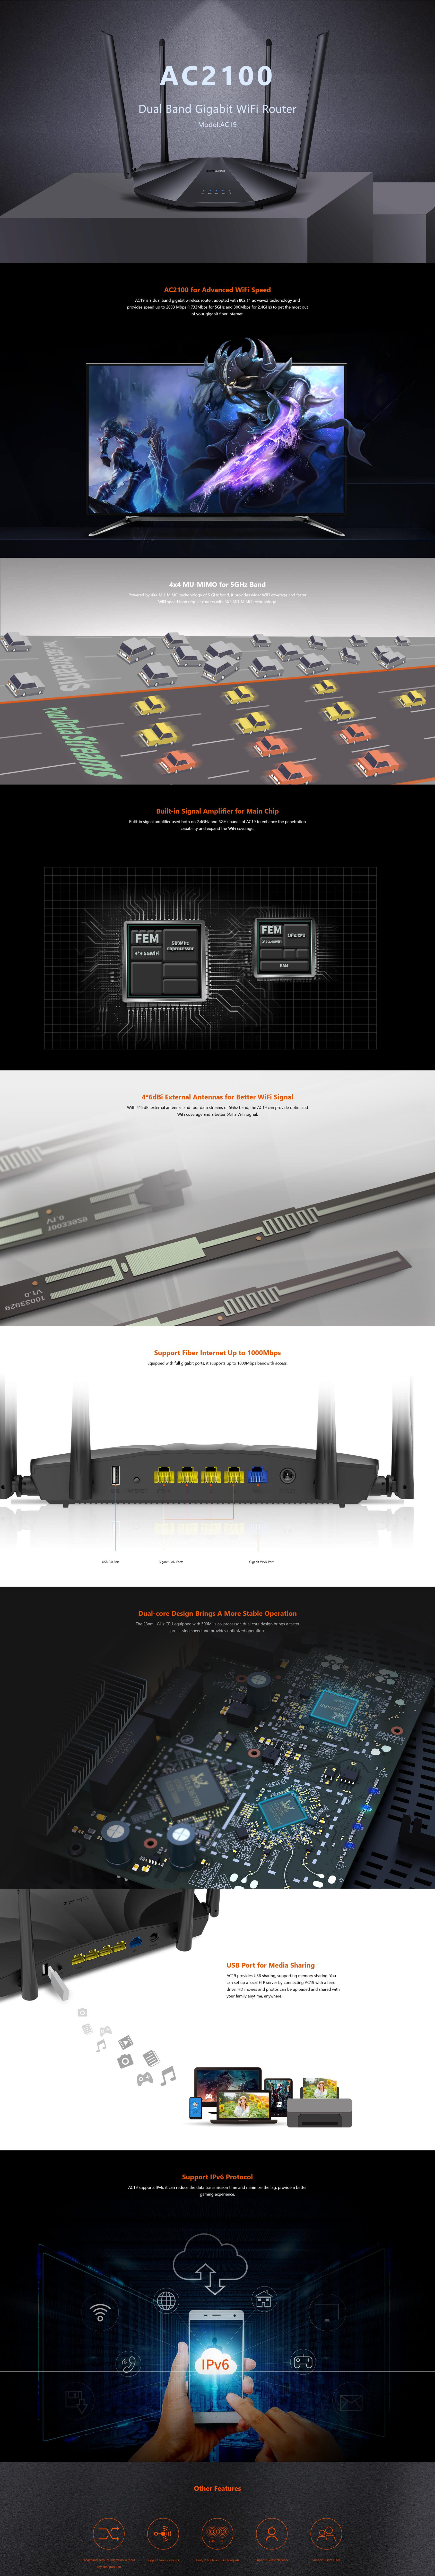 A large marketing image providing additional information about the product Tenda AC2100 Dual Band Gigabit WiFi Router - Additional alt info not provided